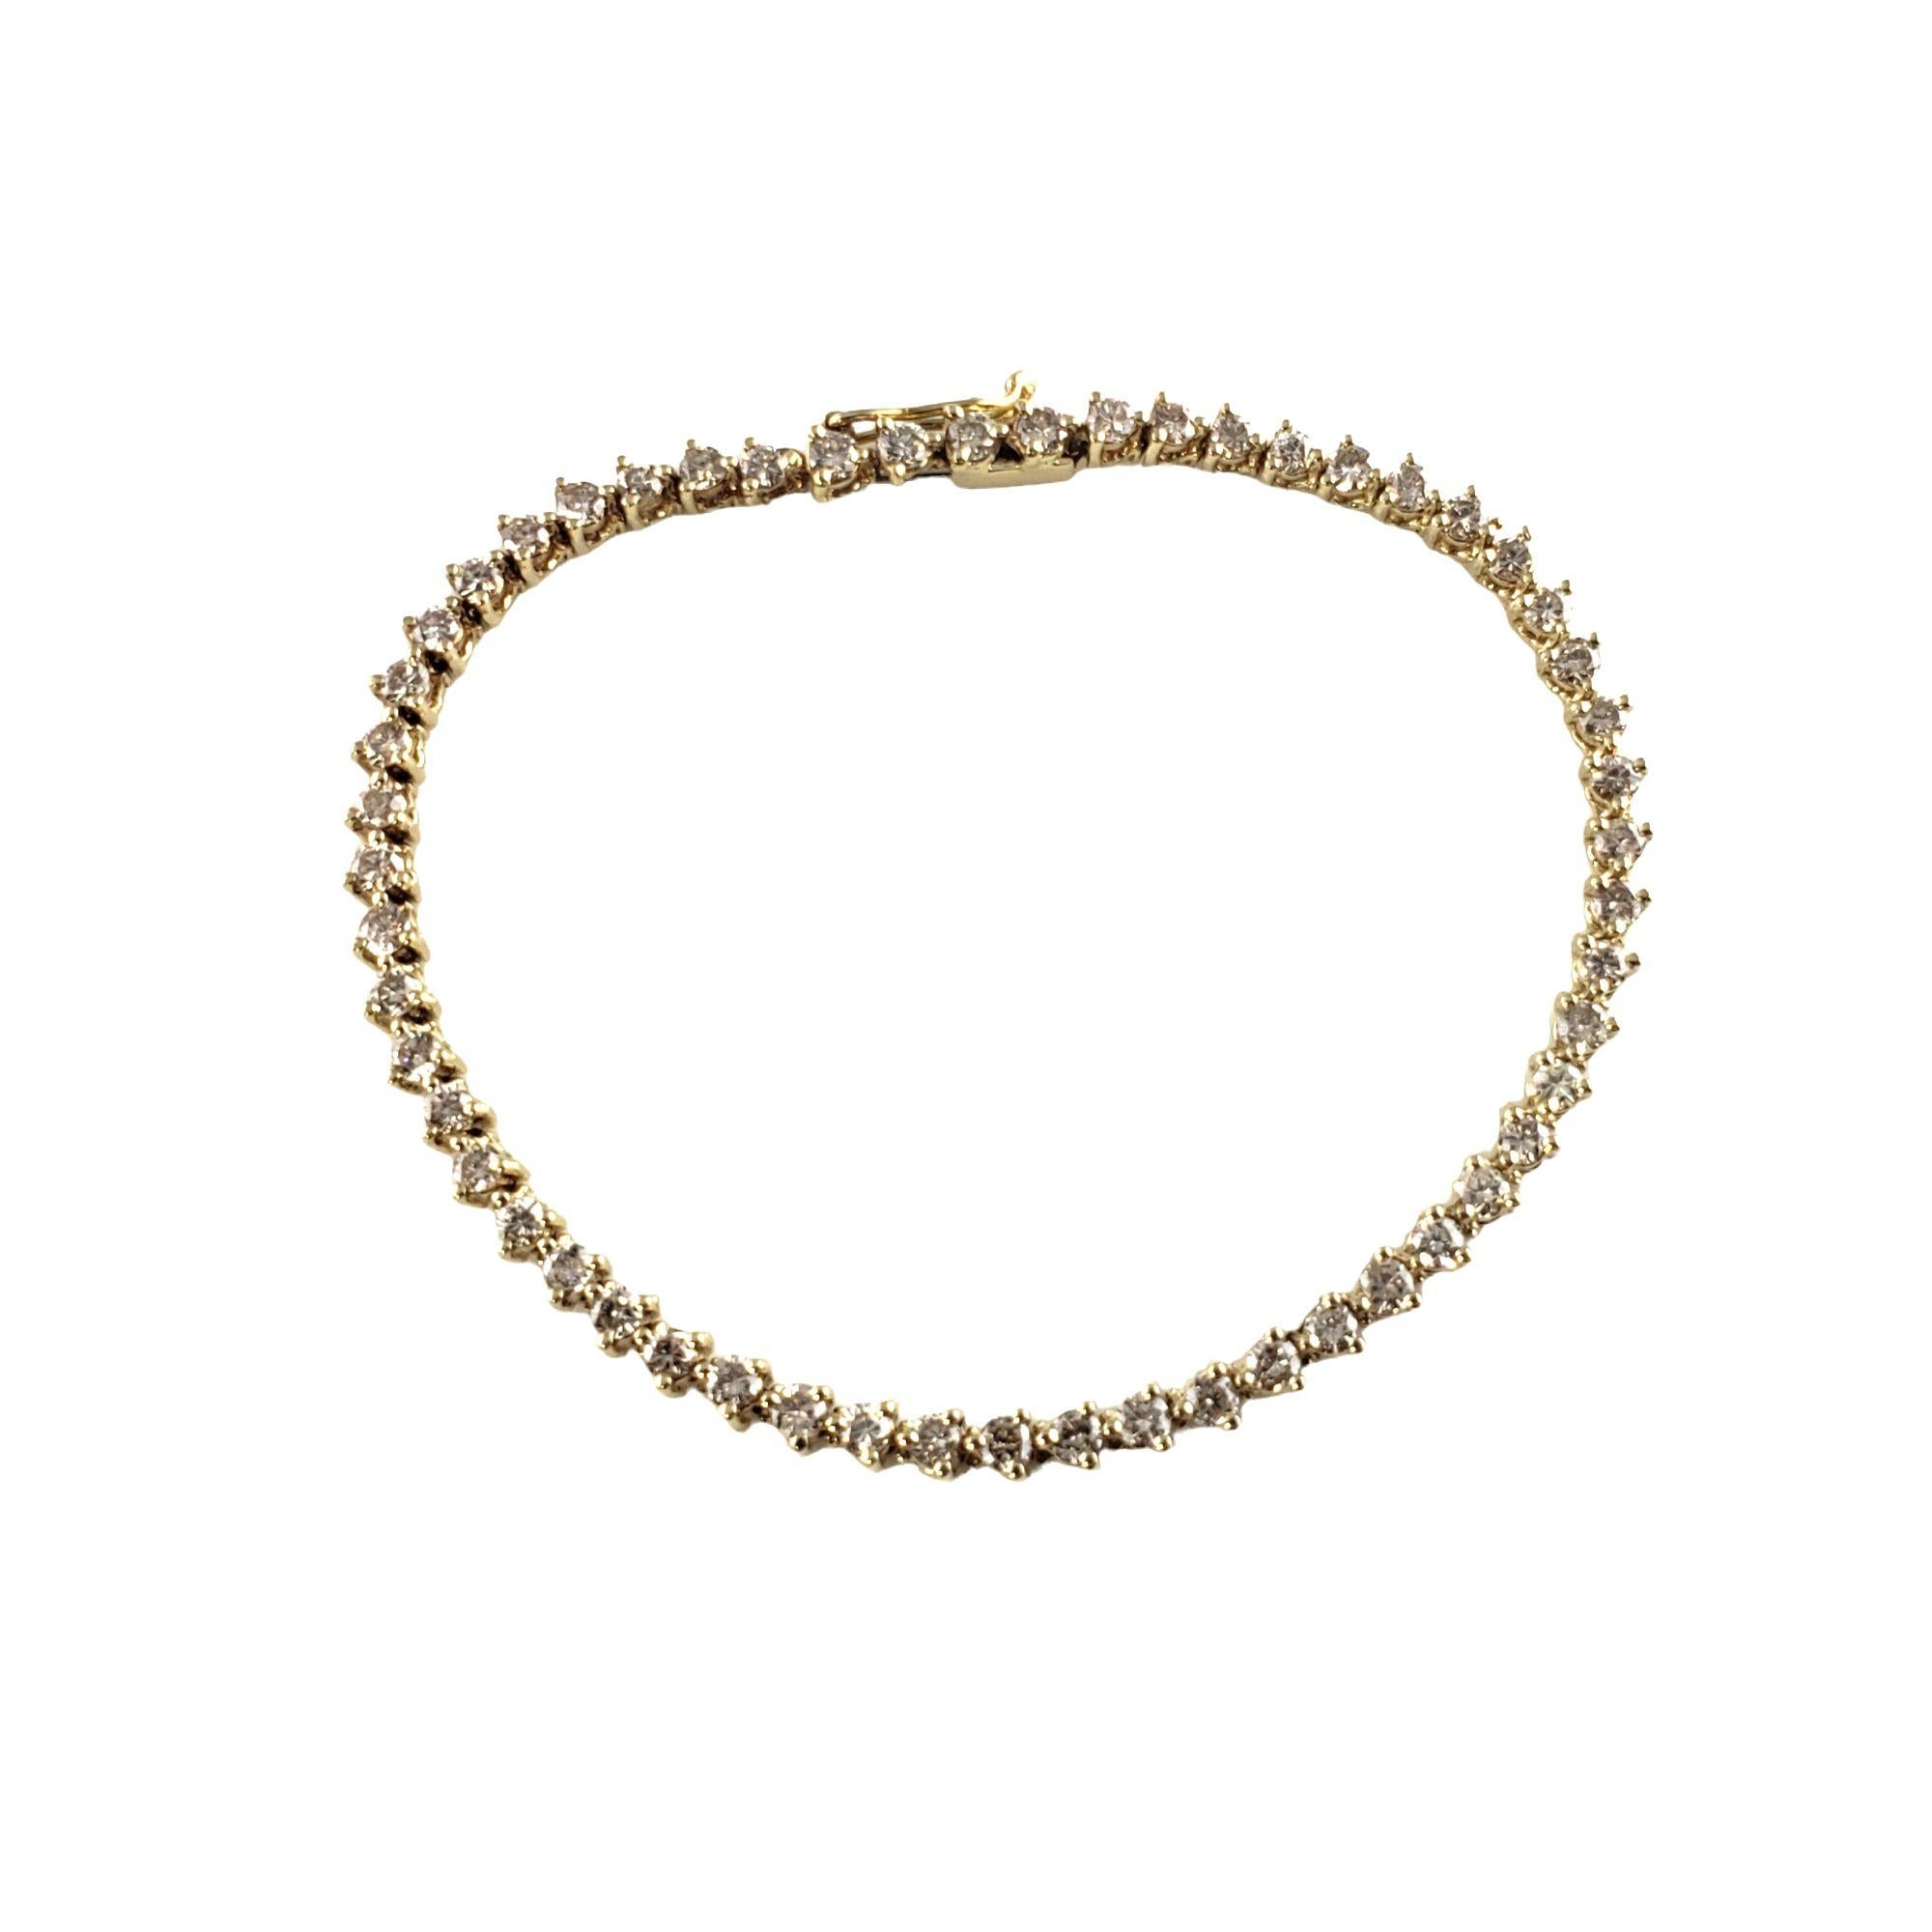 Vintage 14 Karat Yellow Gold Diamond Tennis Bracelet-

This sparkling tennis bracelet features 55 round brilliant cut diamonds* set in classic 14K yellow gold. Width: 3 mm.

*Chip noted to one stone not visible to naked eye.

Approximate total